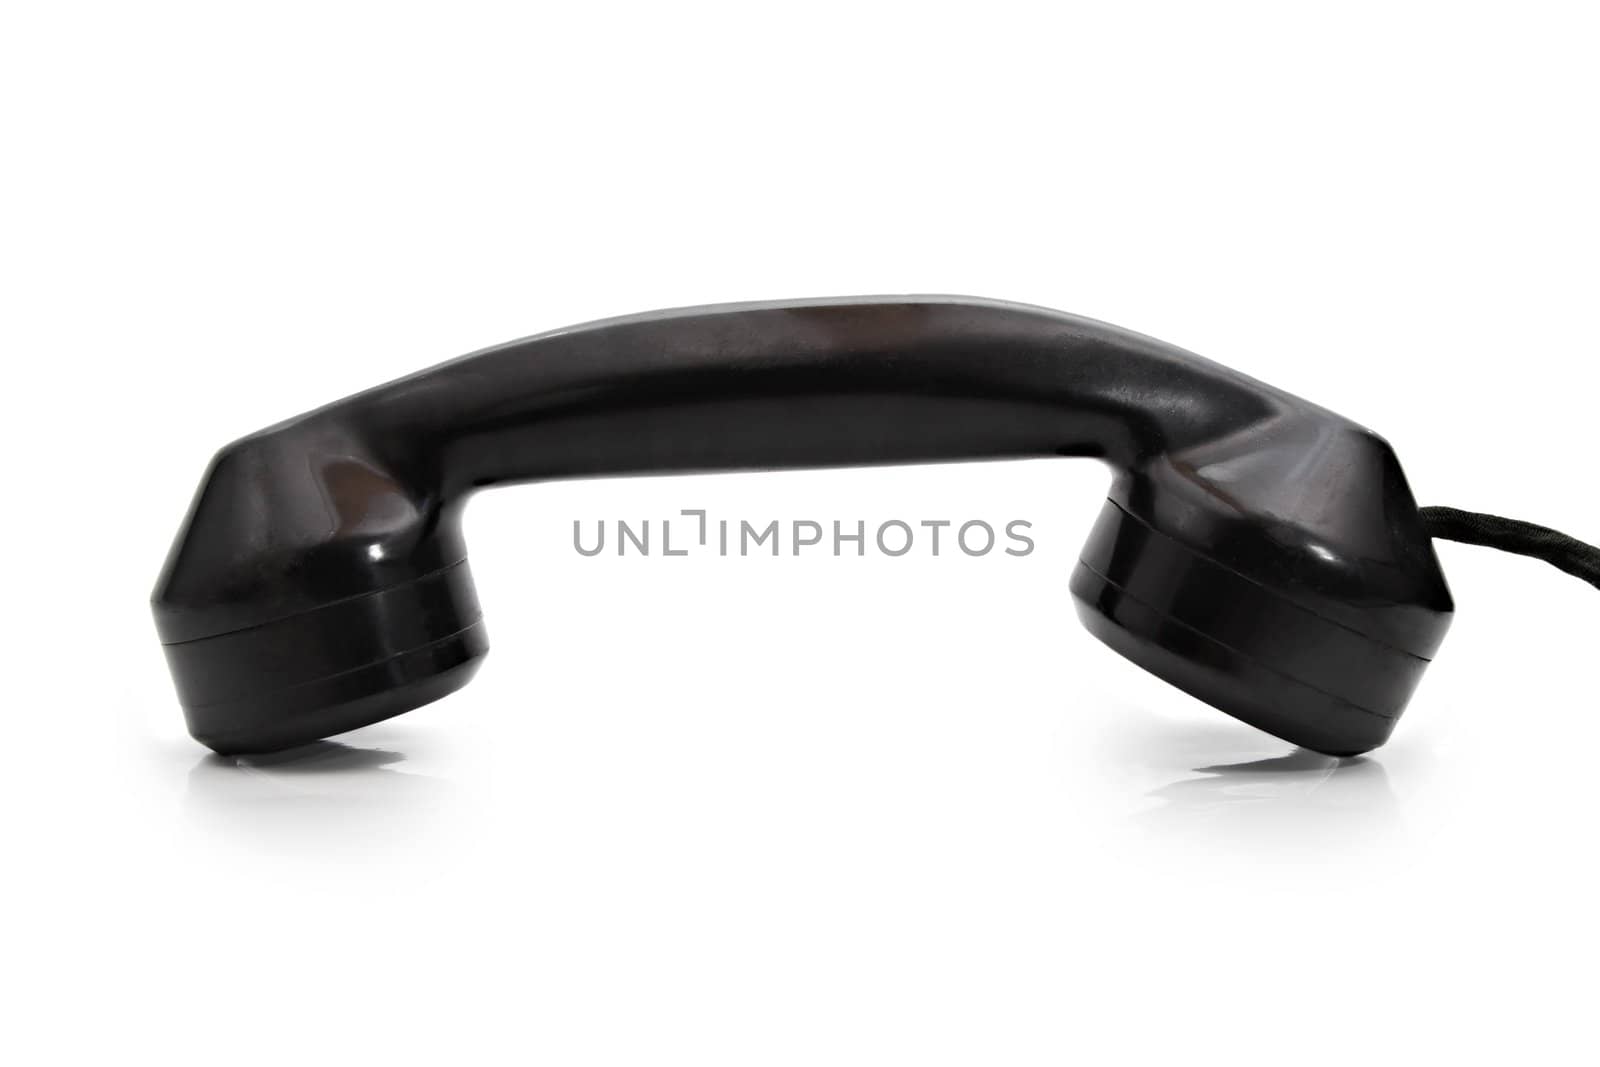 old-fashioned phone handset, isolated on white